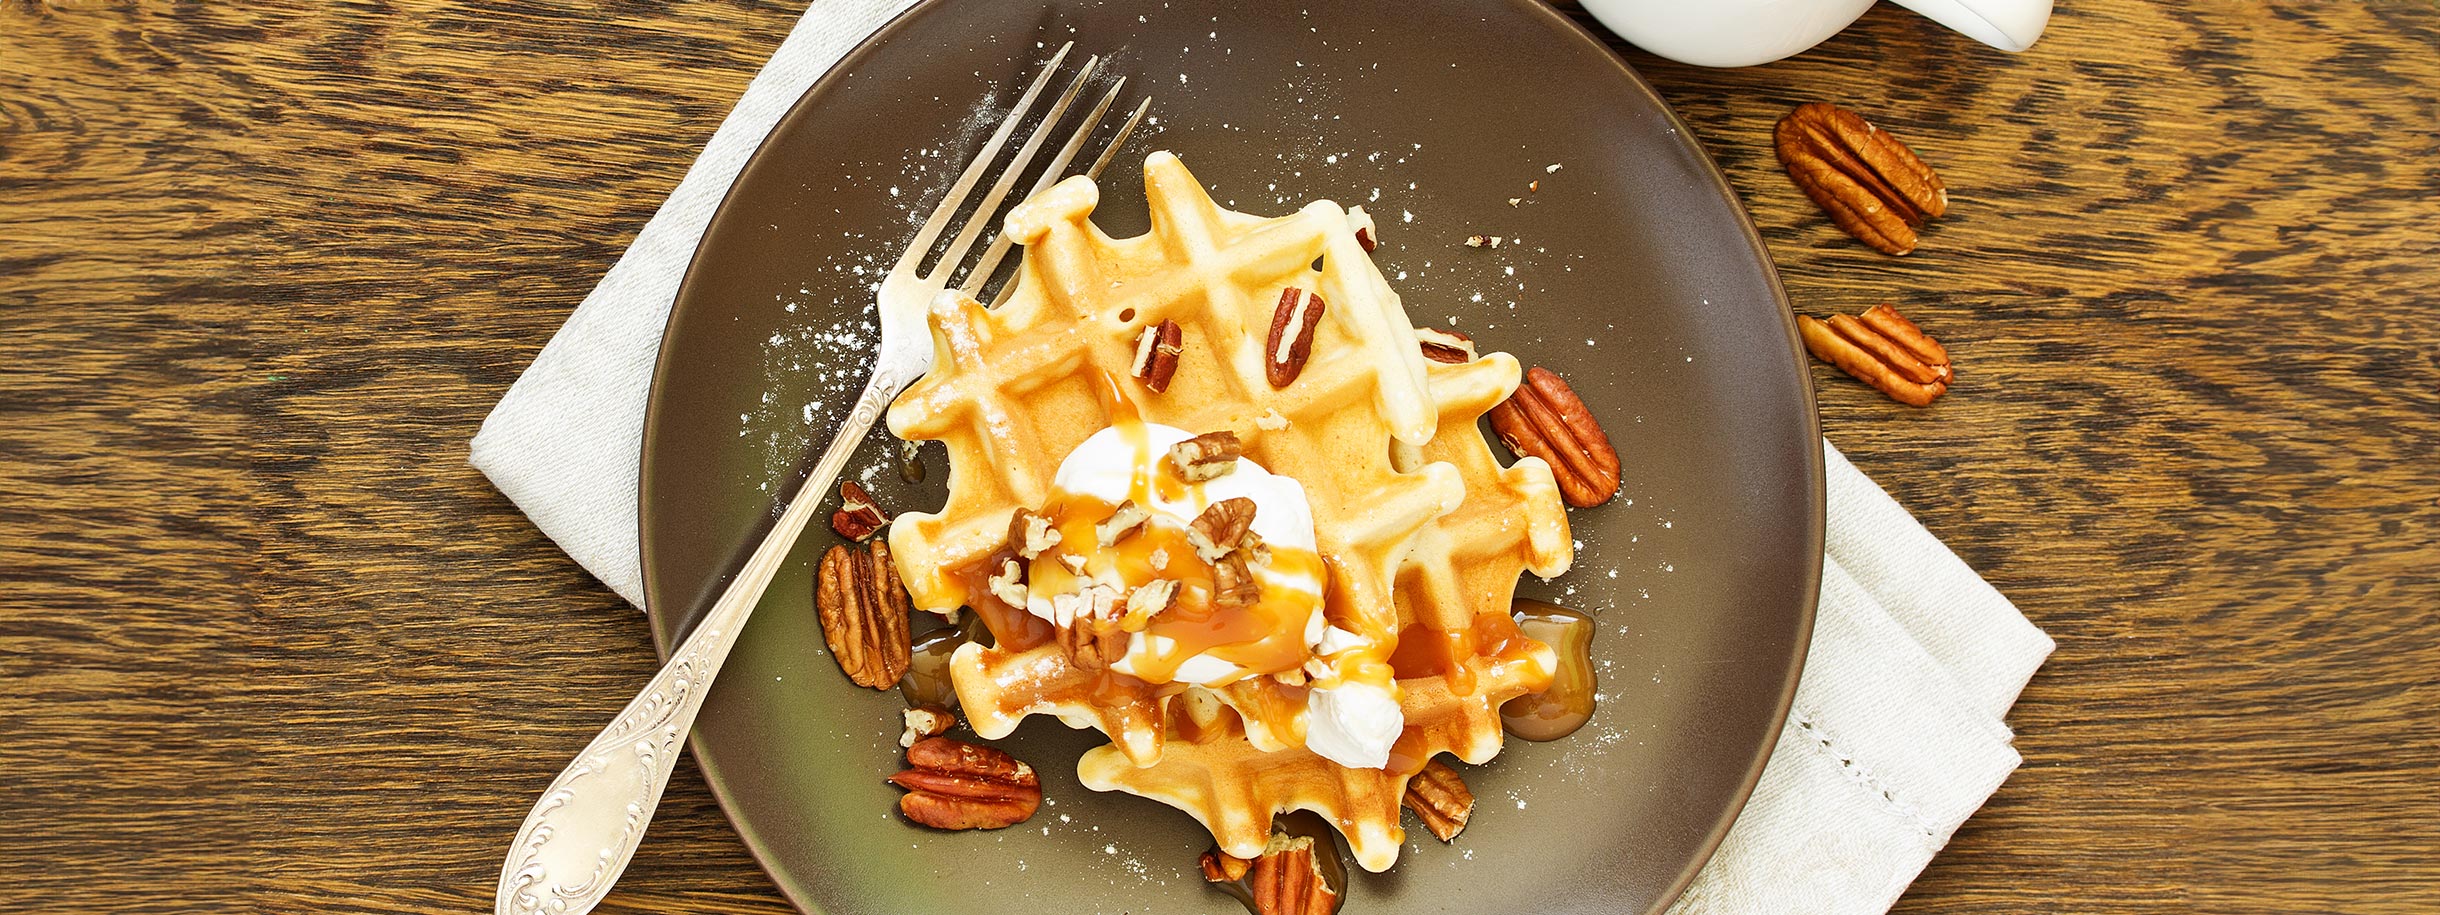 Pumpkin Waffles on plate with Pecans